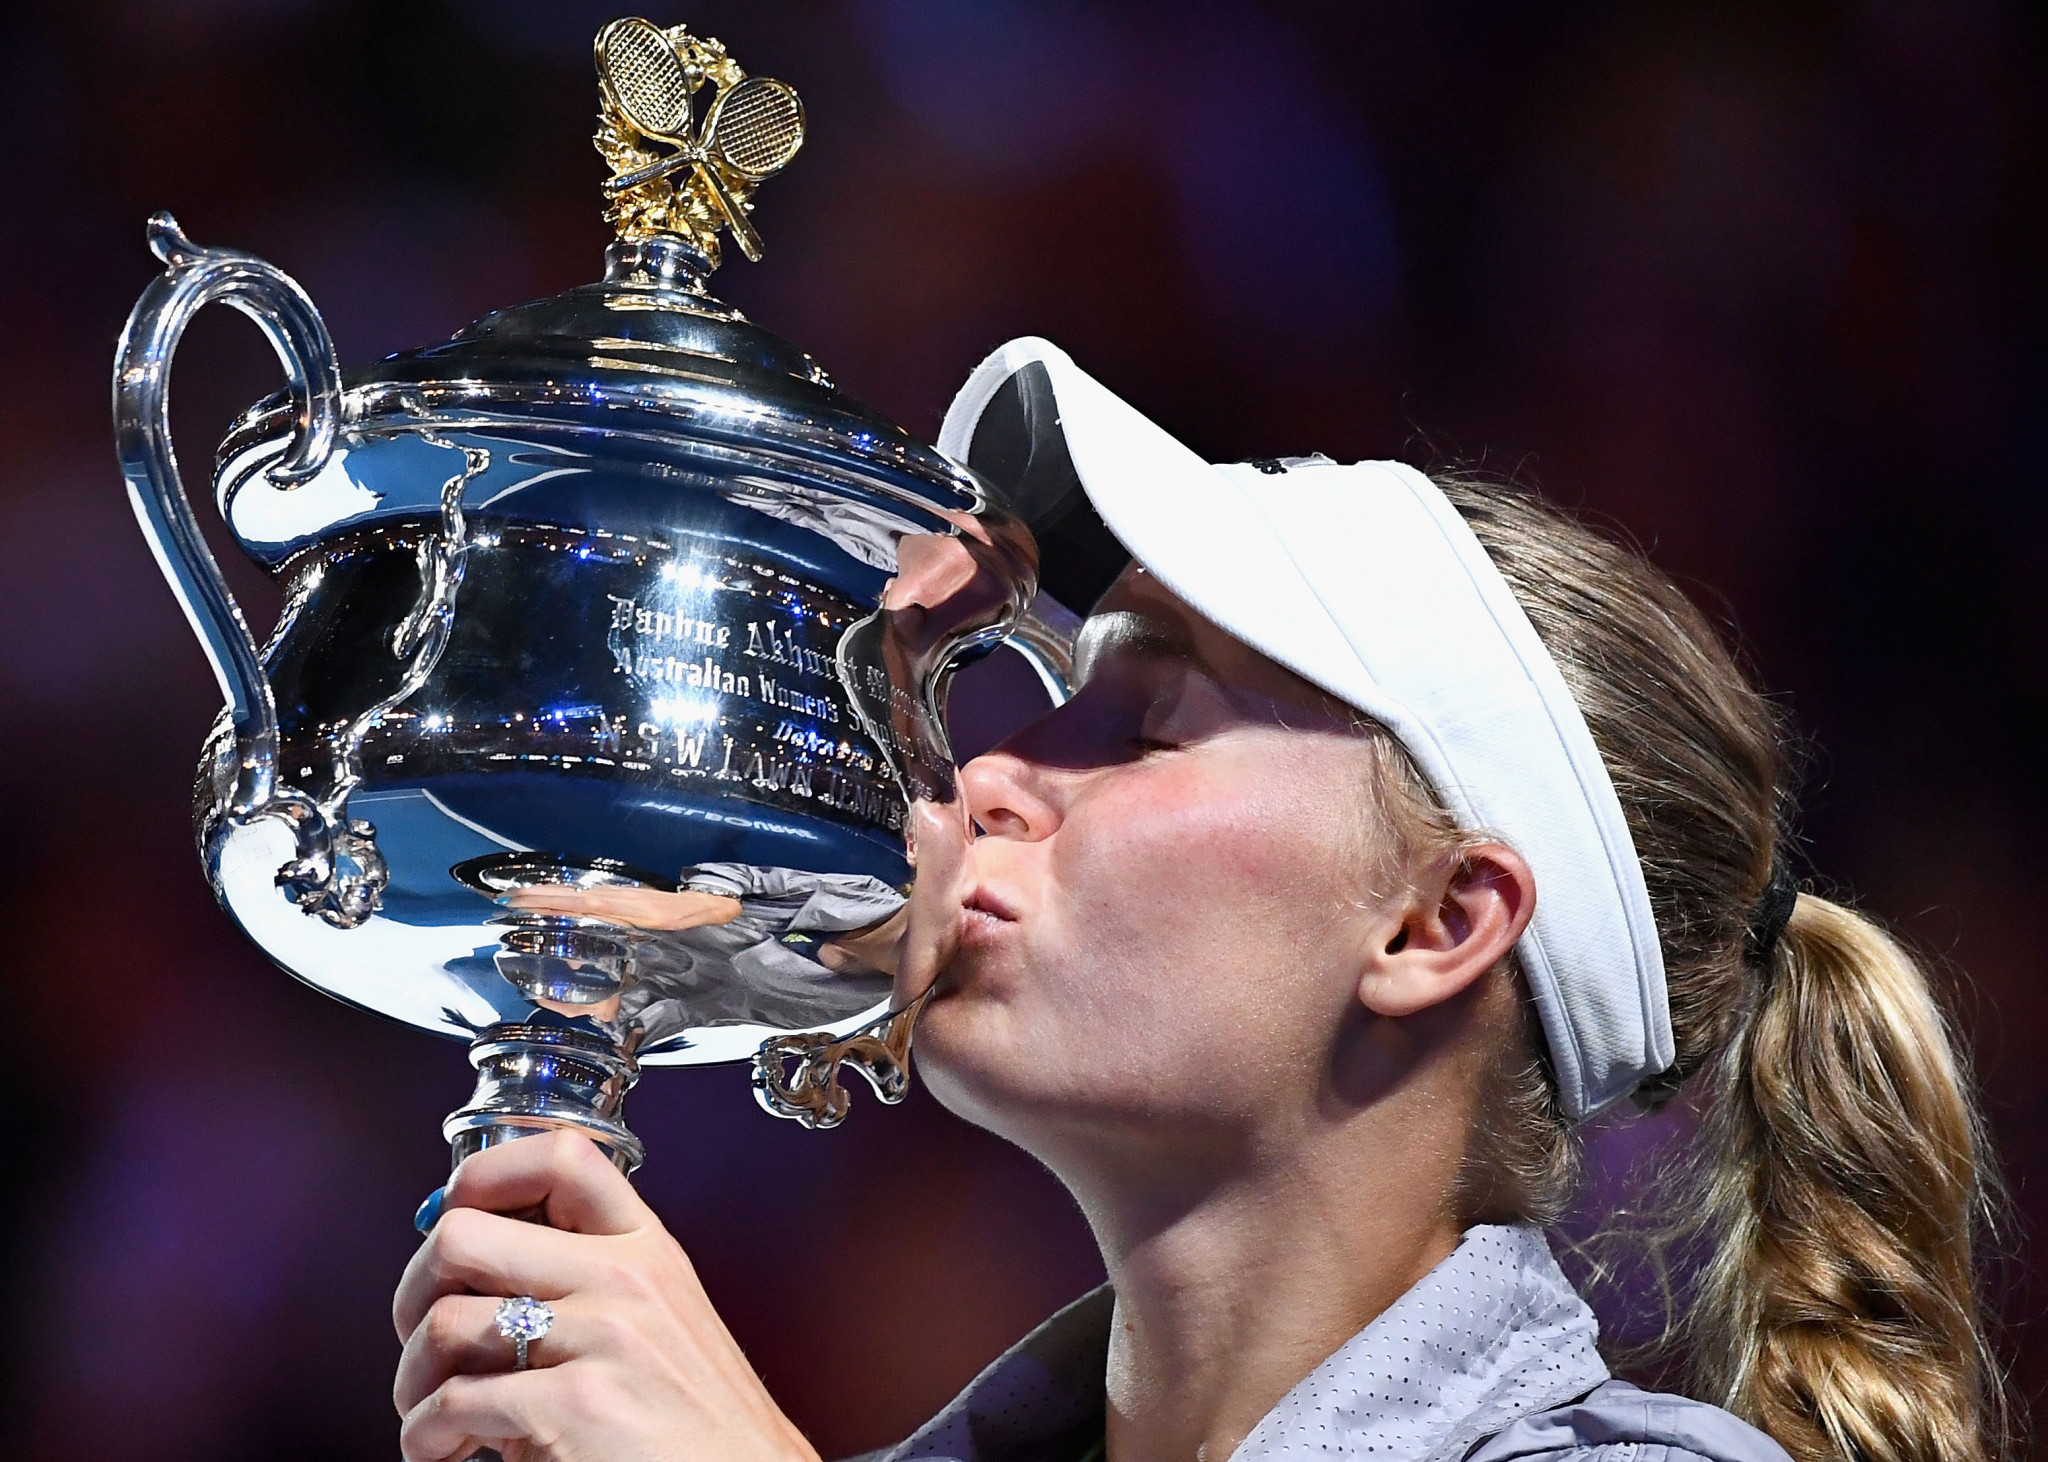 Wozniacki secures first Grand Slam title with Australian Open triumph